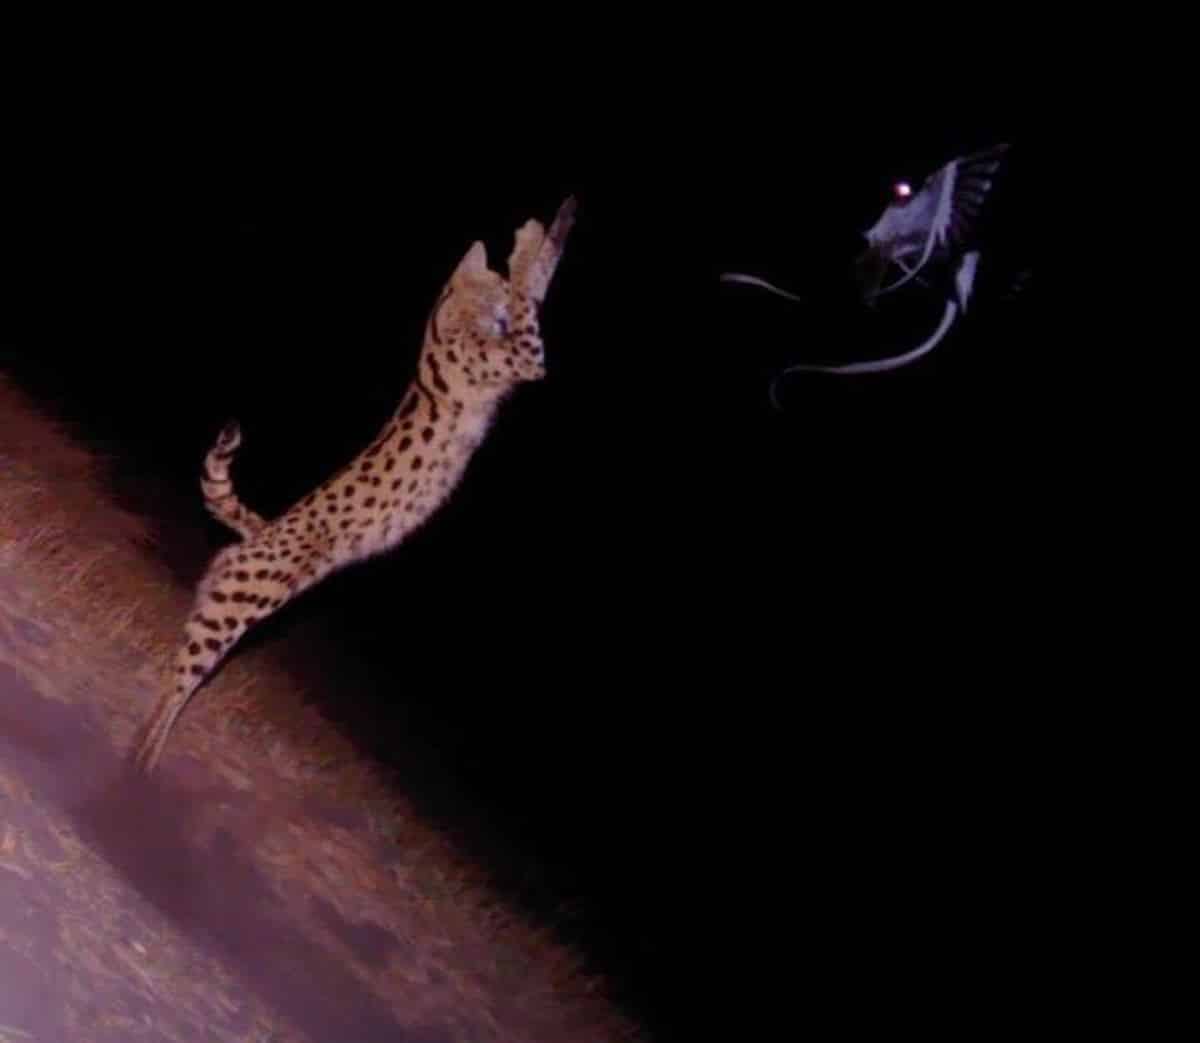 Serval Attempting to Catch Prey in Zambia